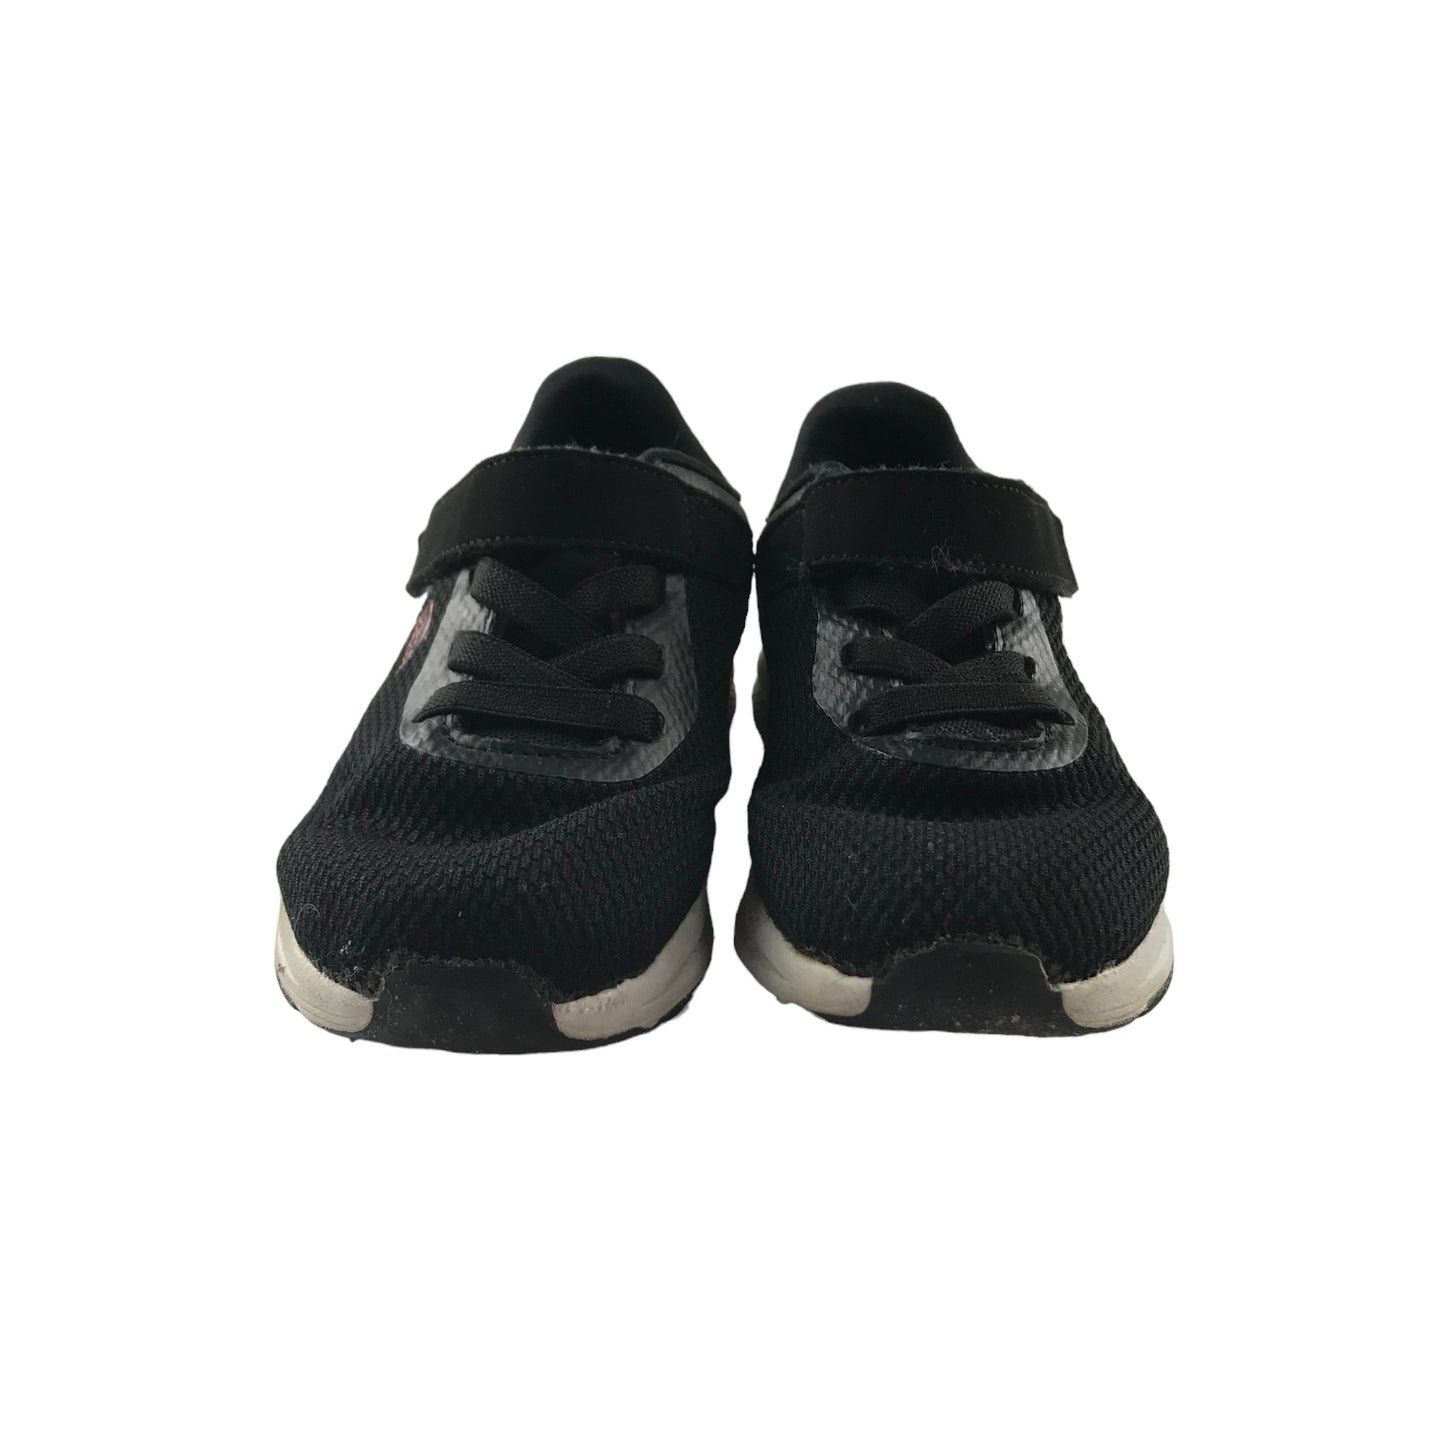 Slazenger Trainers Shoe Size 11C Junior Black with Laces and Loop and Hoop Straps